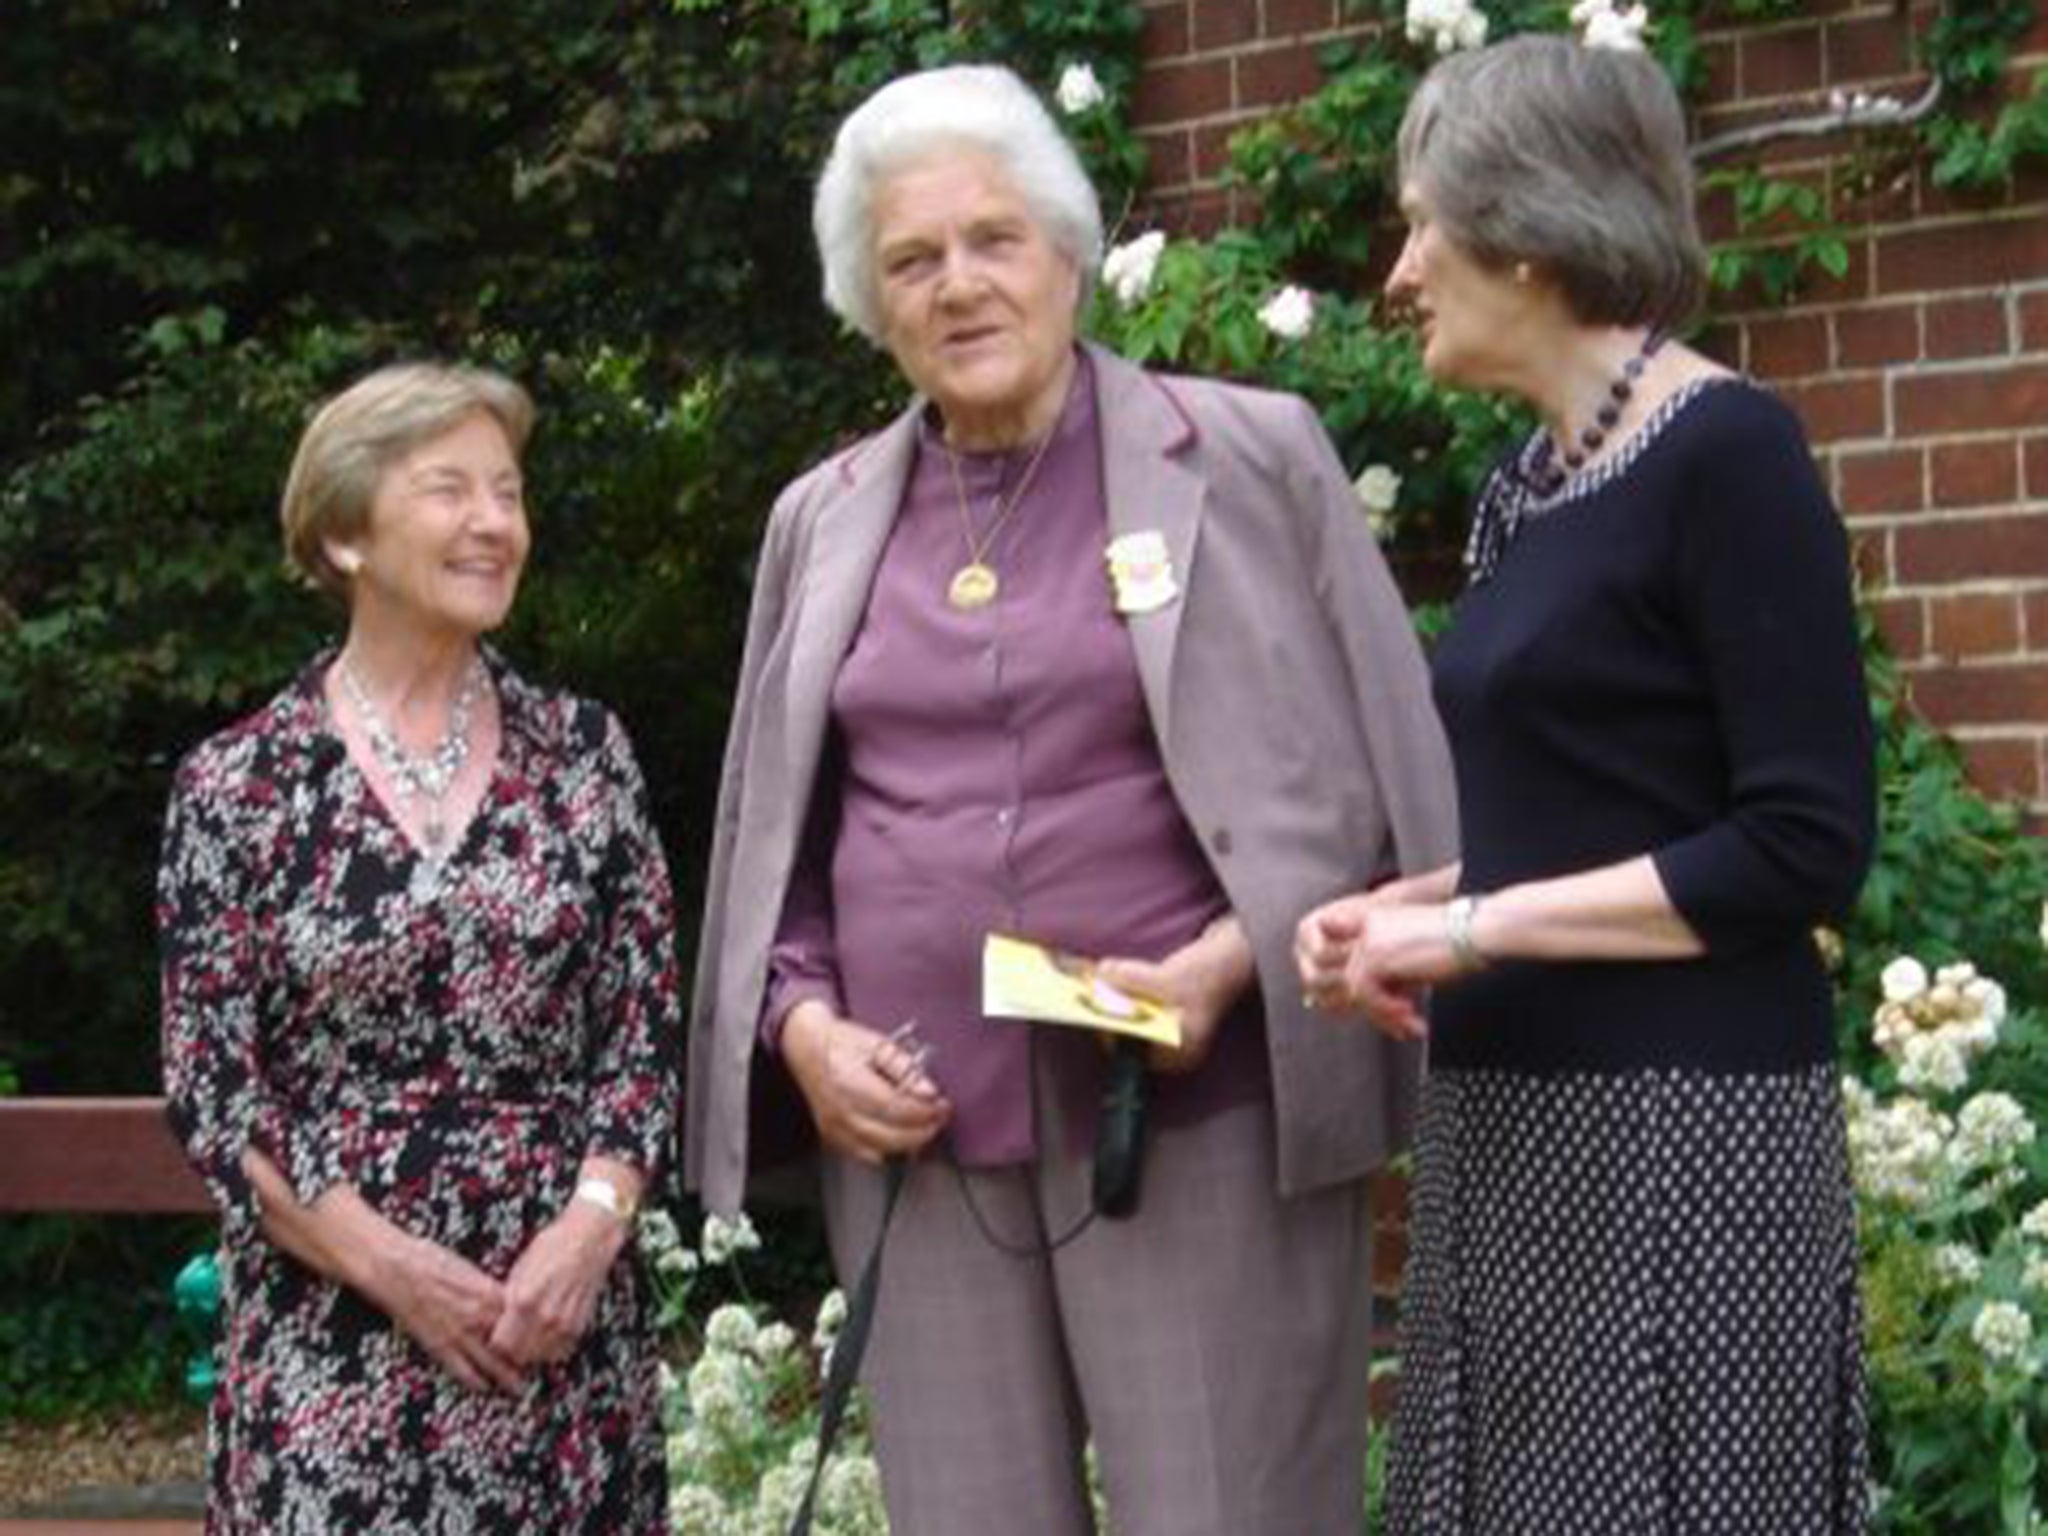 Warburton, centre, with Baroness Perry, left, her successor as President of Lucy Cavendish College, and Janet Todd, the current President